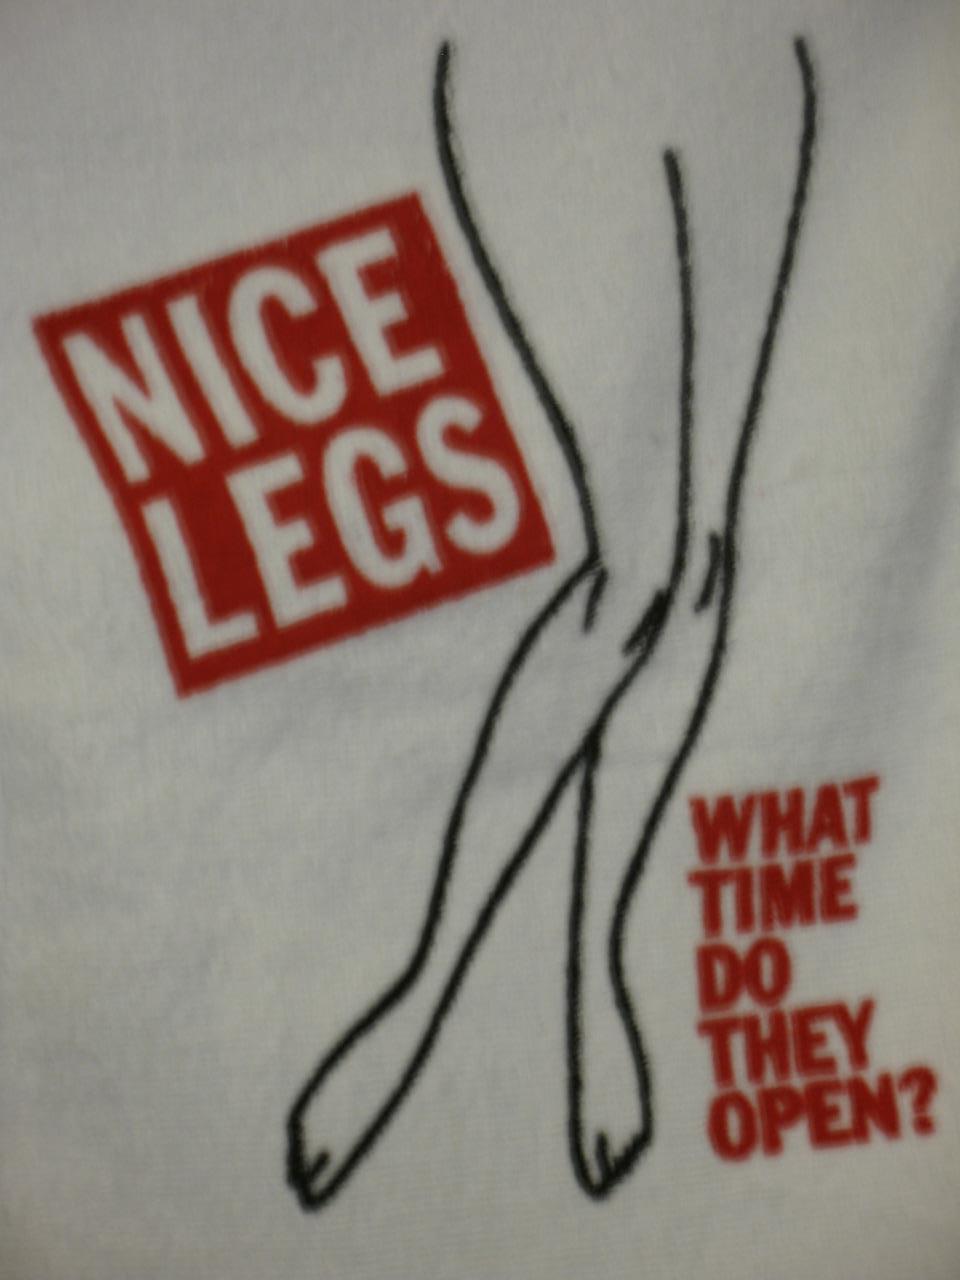 Primary image for 12 BOWLERS TOWEL NICE LEGS! bowlers funny saying towel what time do they open?